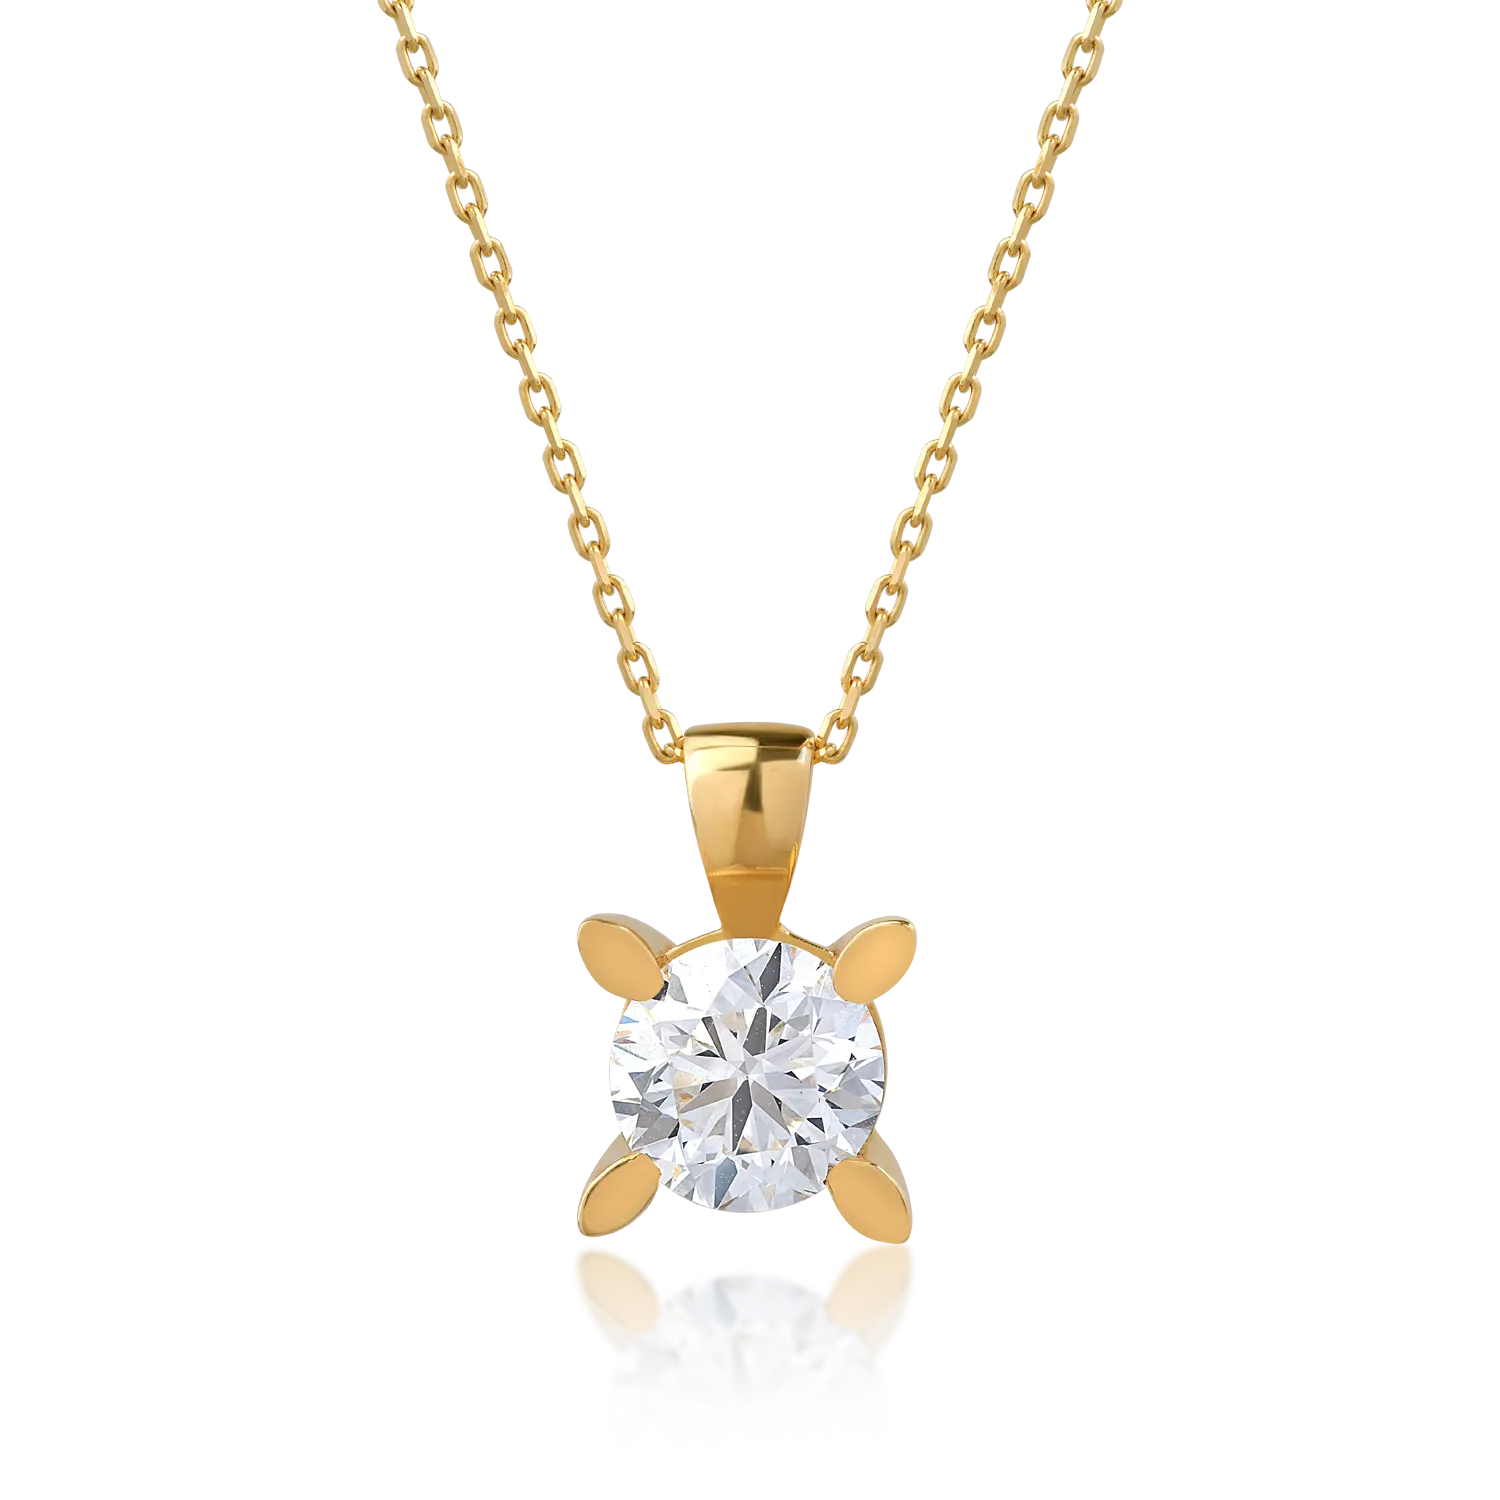 18K yellow gold pendant necklace with 1ct diamond